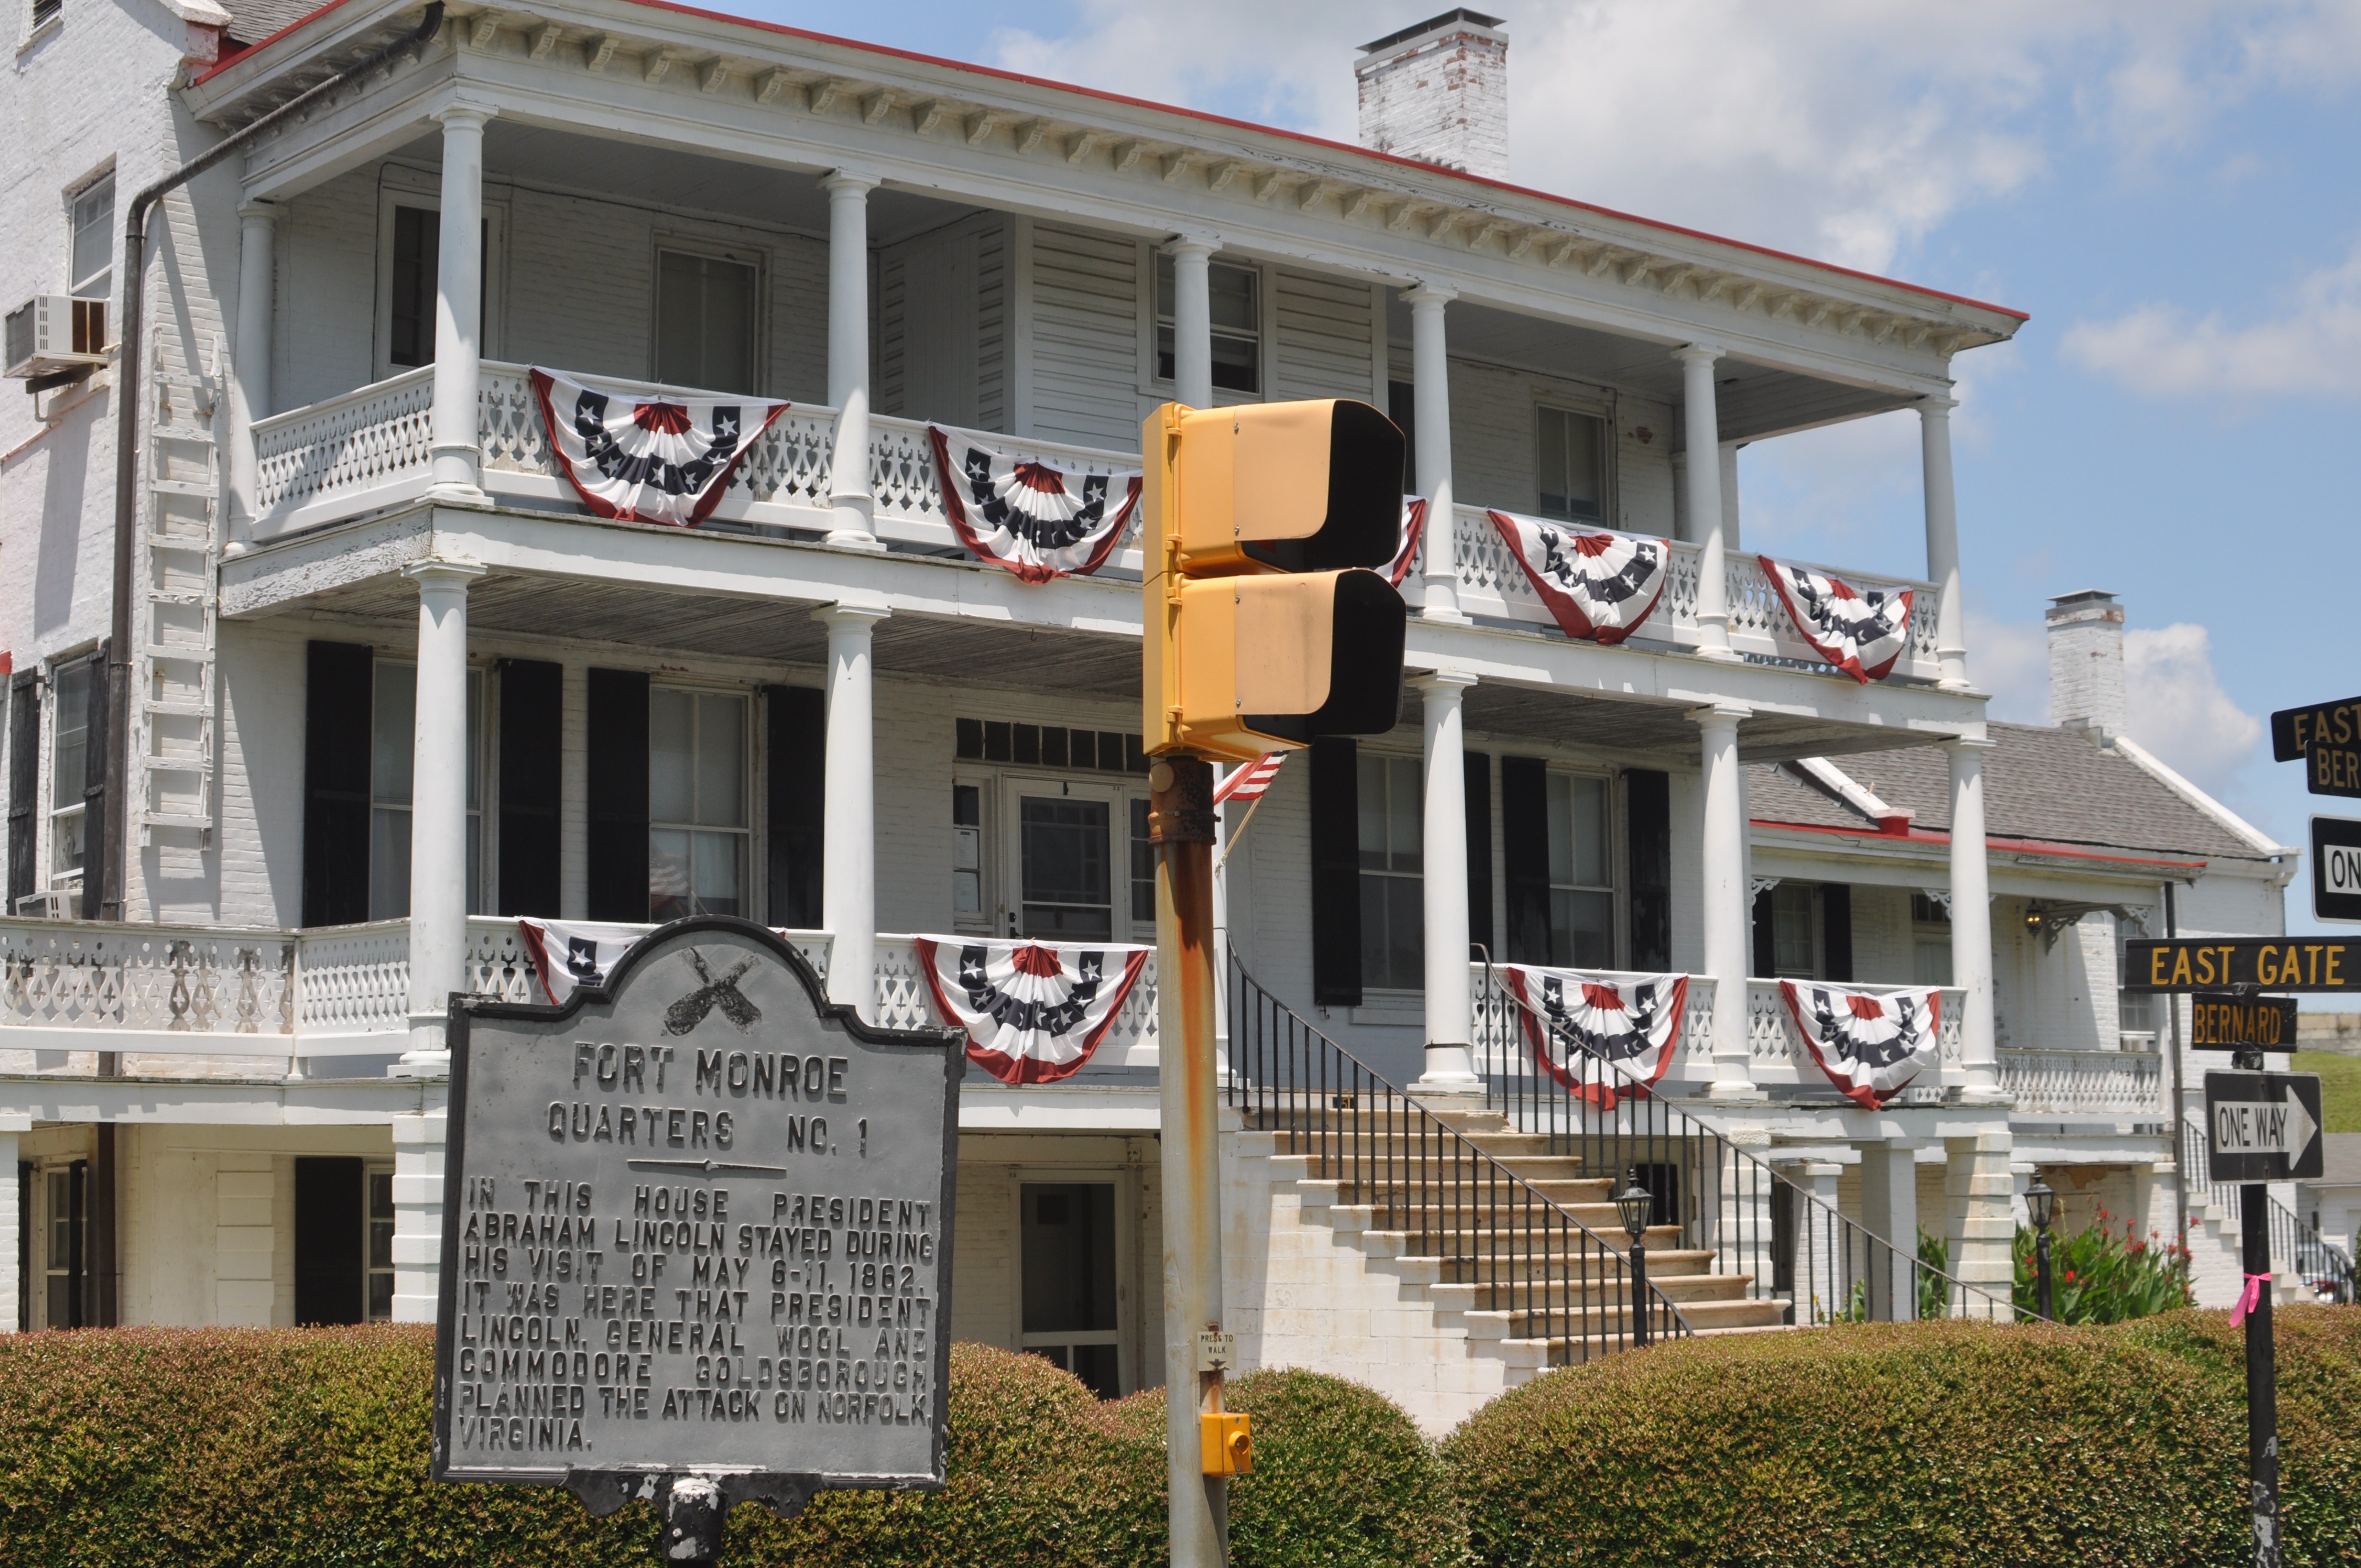 President Lincoln Stayed Here And Planned The Attack On Norfolk